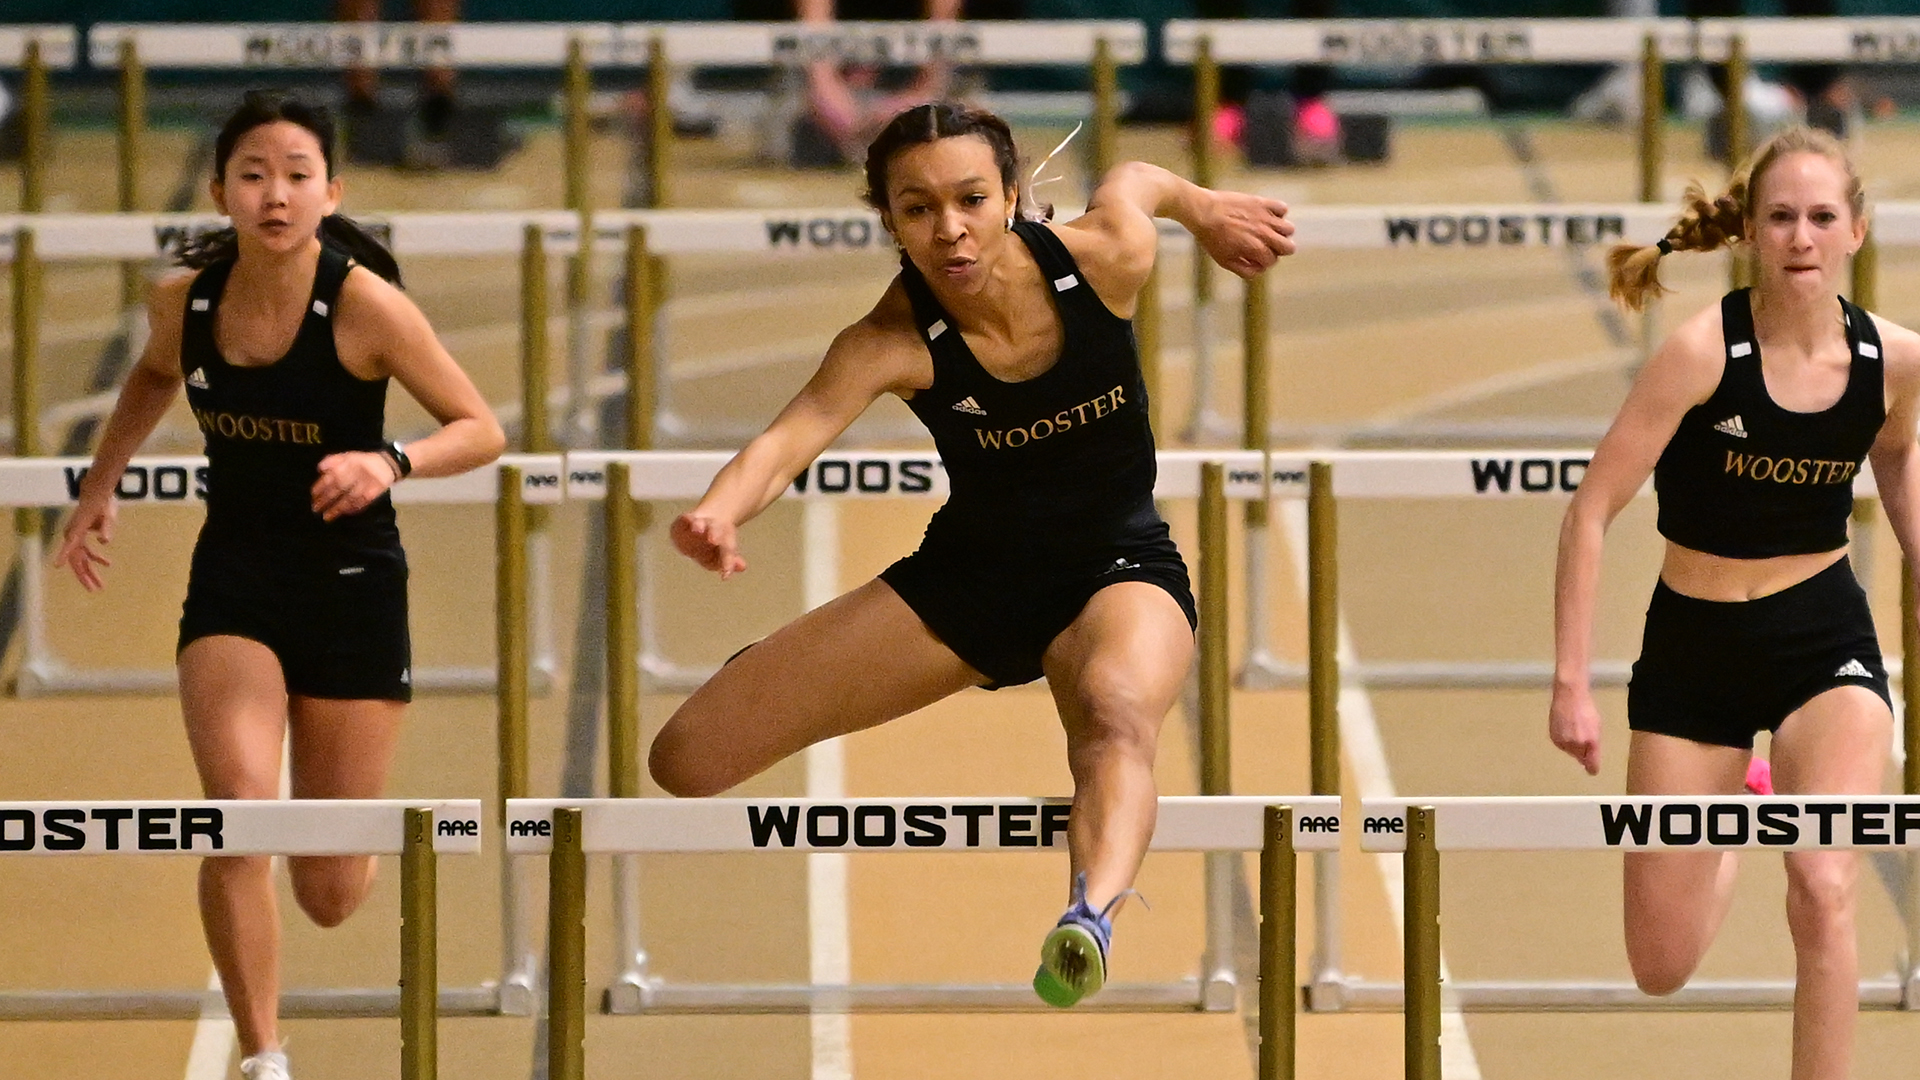 Daysia Hargrave, Wooster track & field